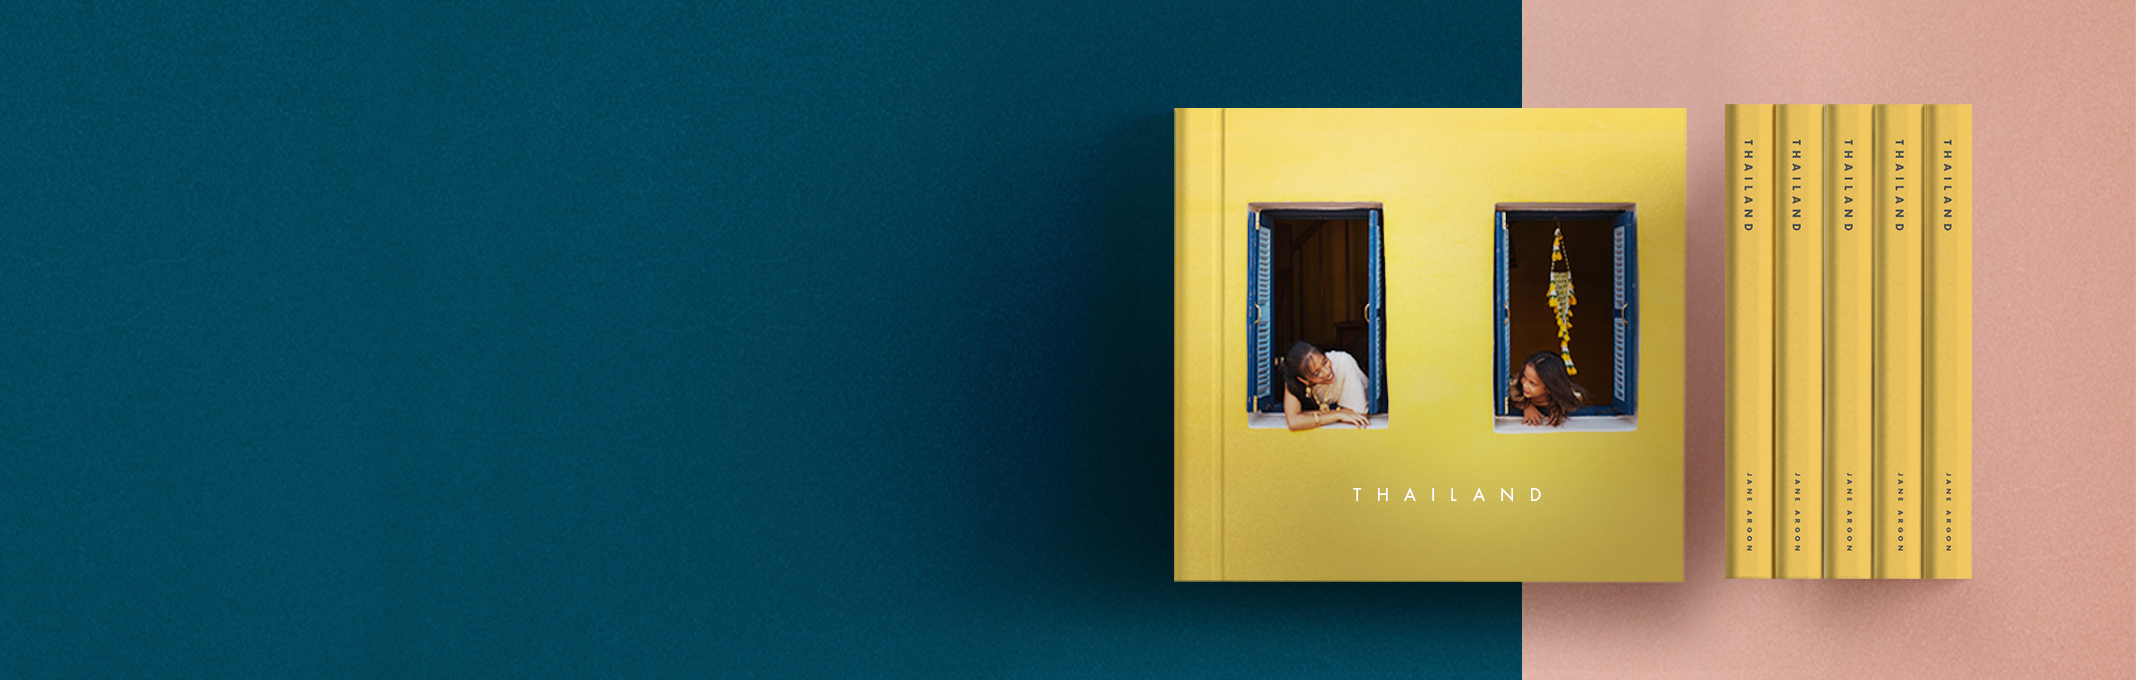 Hardcover book with the words "Thailand" printed on the front in white font against a canary yellow background. The cover photo shows to people smiling at each other while peering out of two windows that have bright blue shutters. 